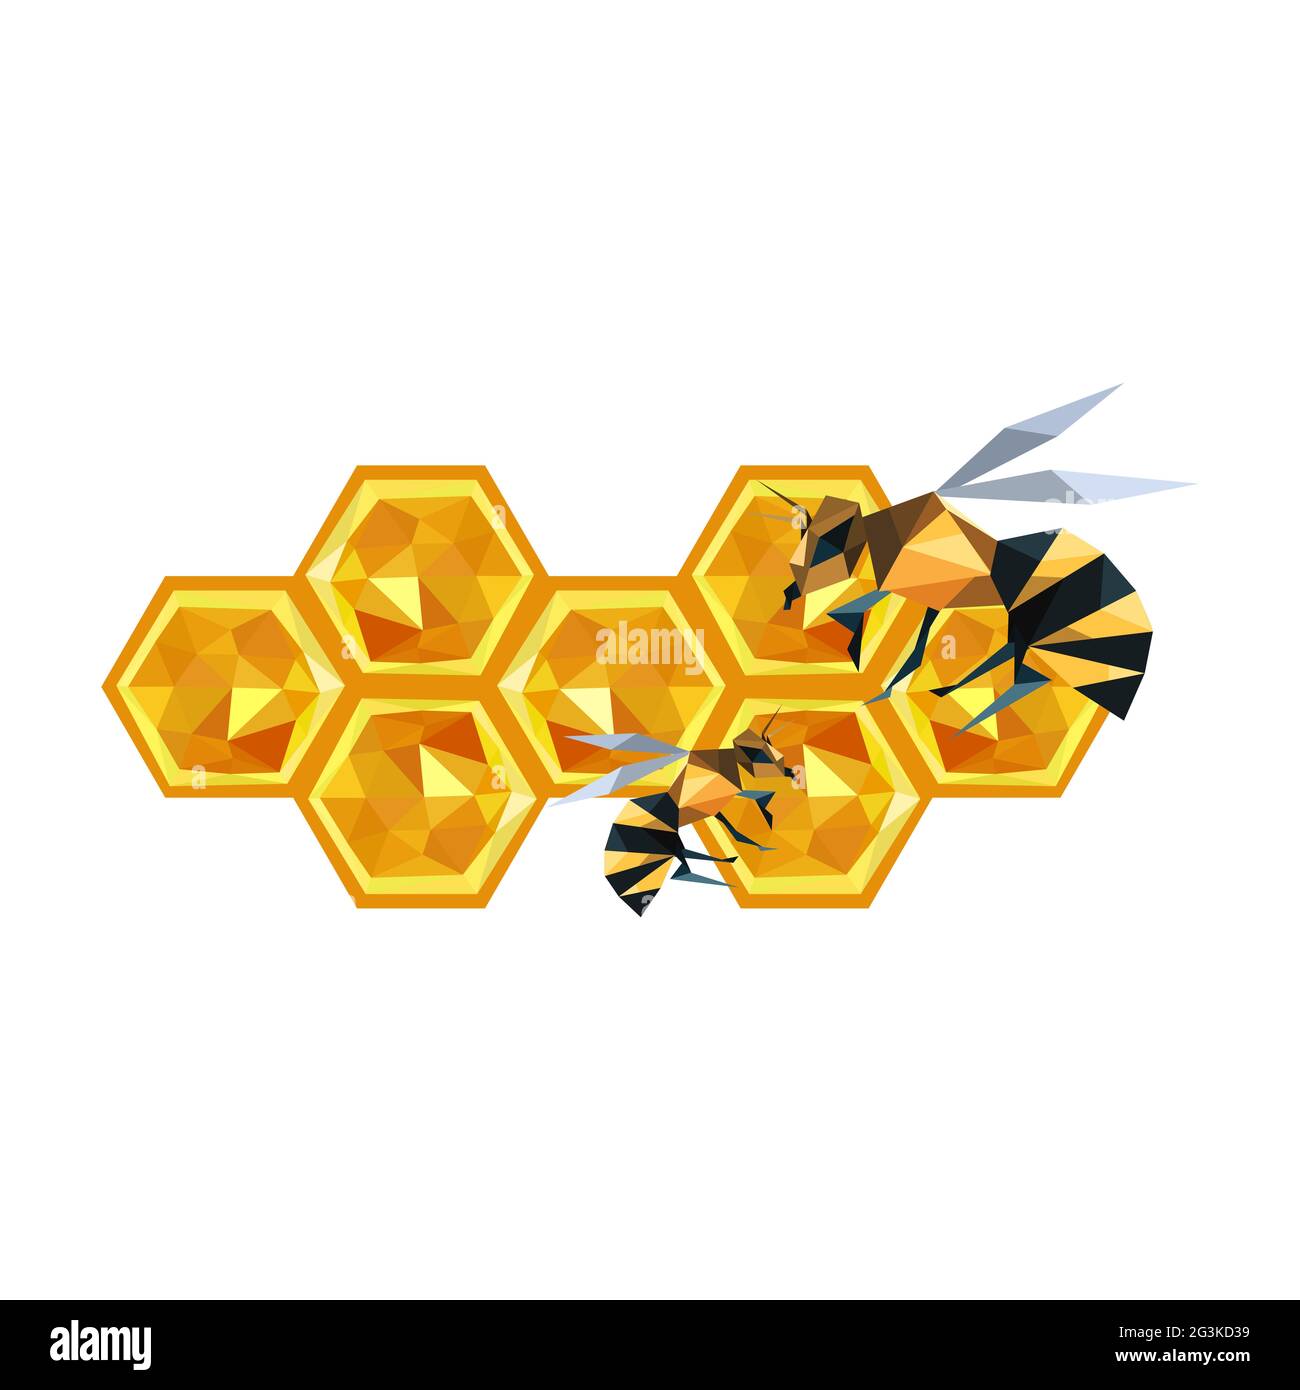 Illustration of origami honeycomb design and bees Stock Photo